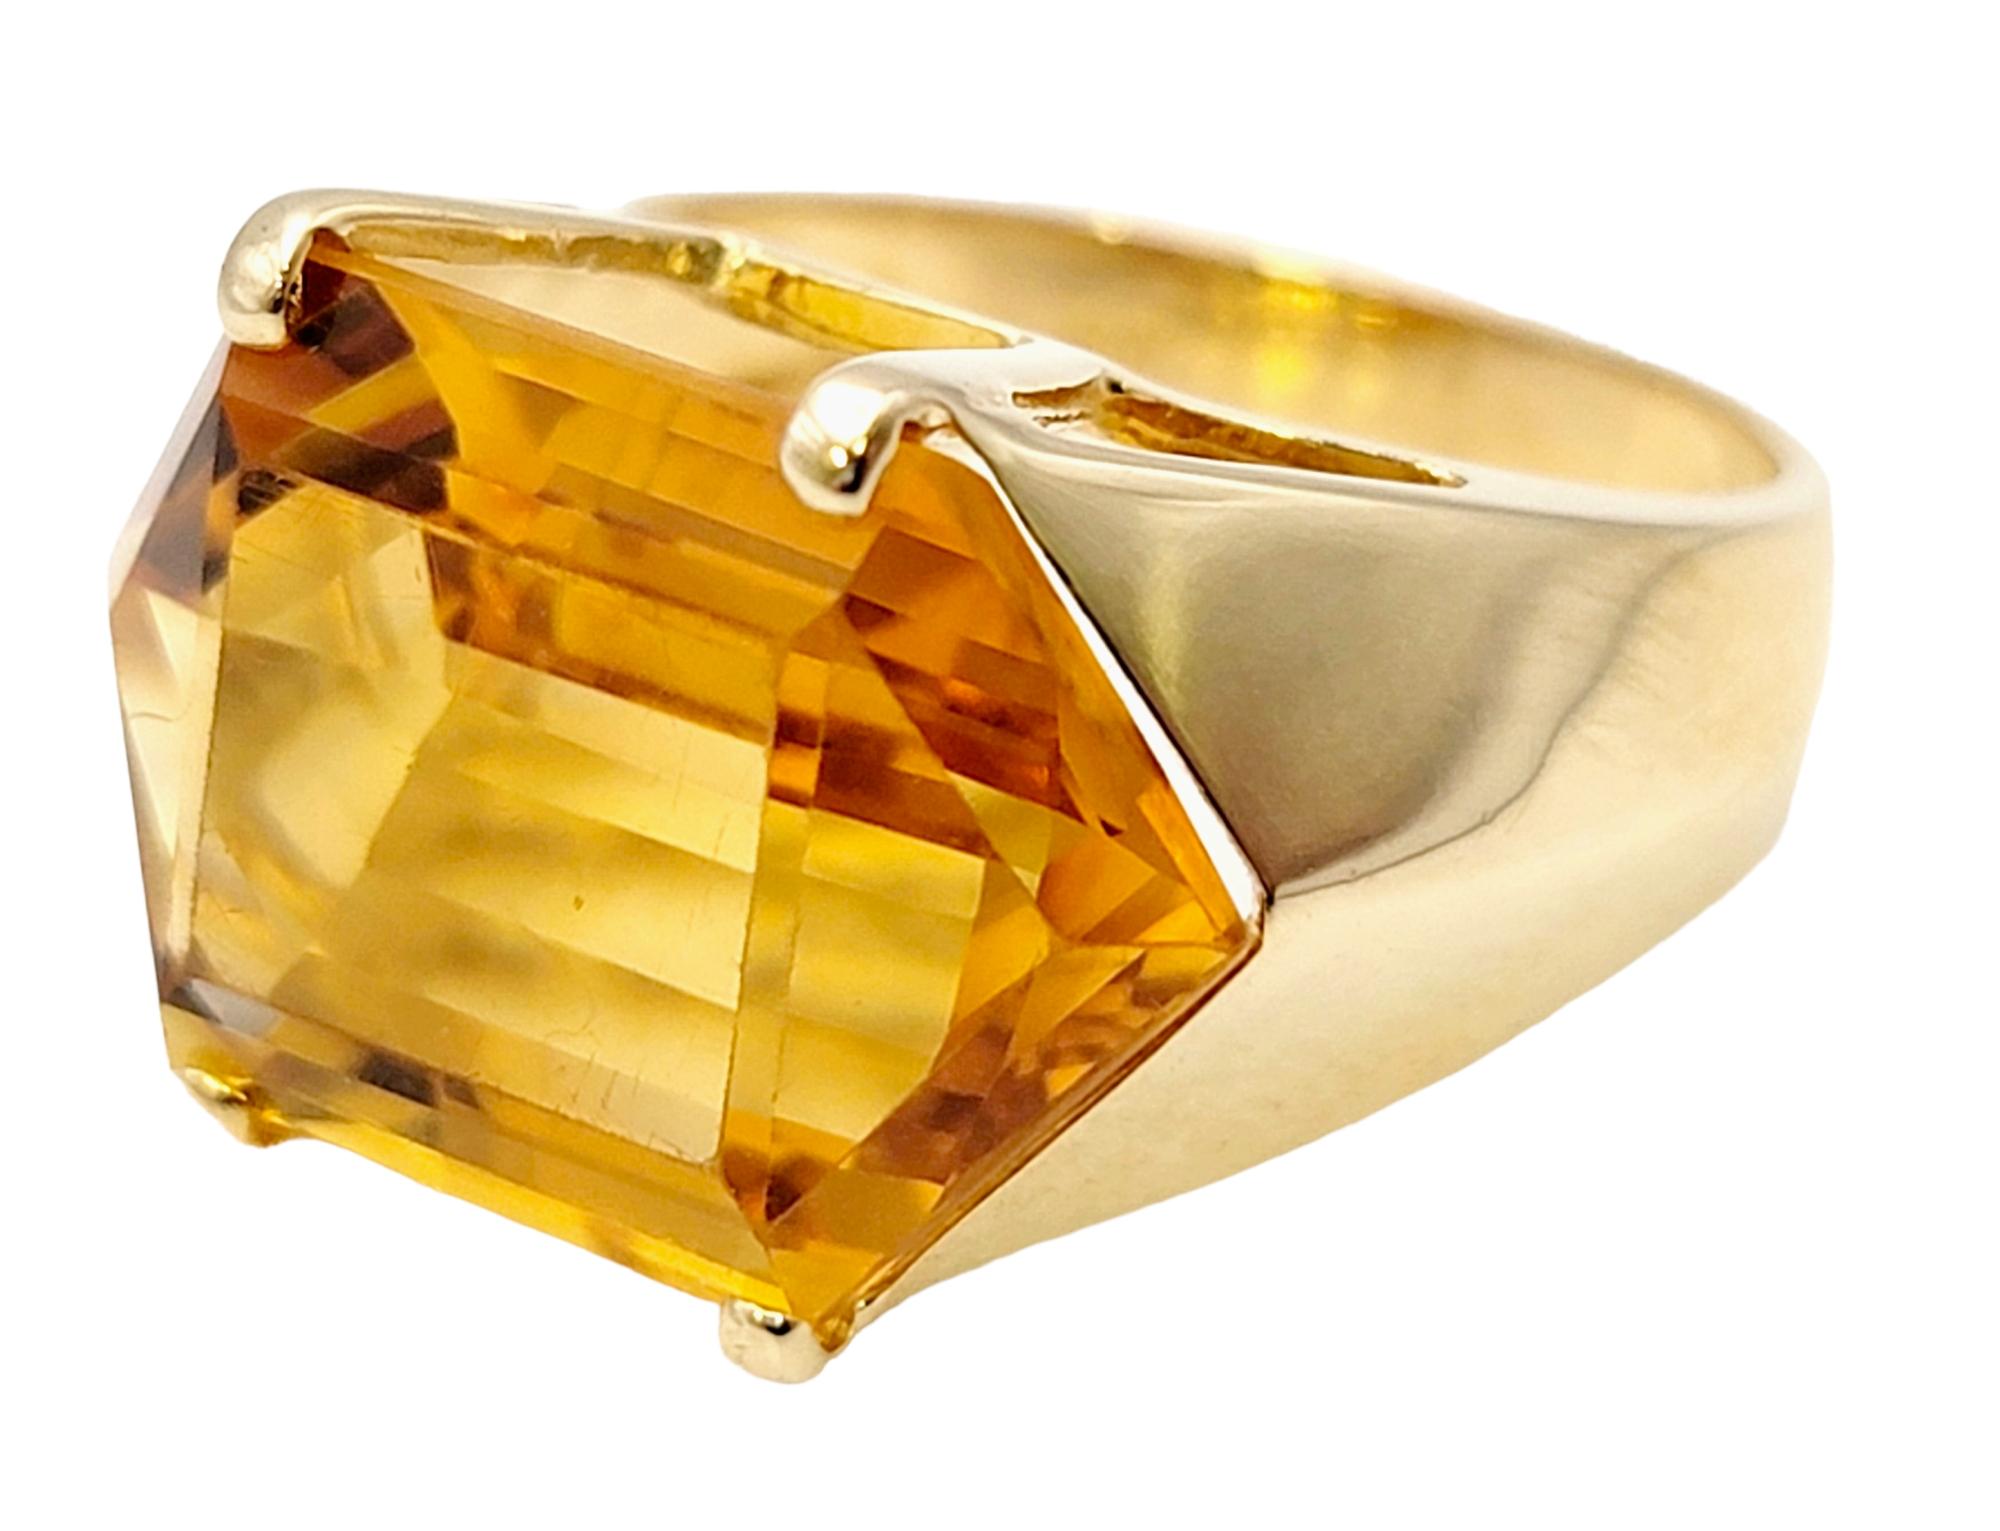 10.46 Carats Total Hexagonal Cut Citrine Cocktail Ring in 14 Karat Yellow Gold In Good Condition For Sale In Scottsdale, AZ